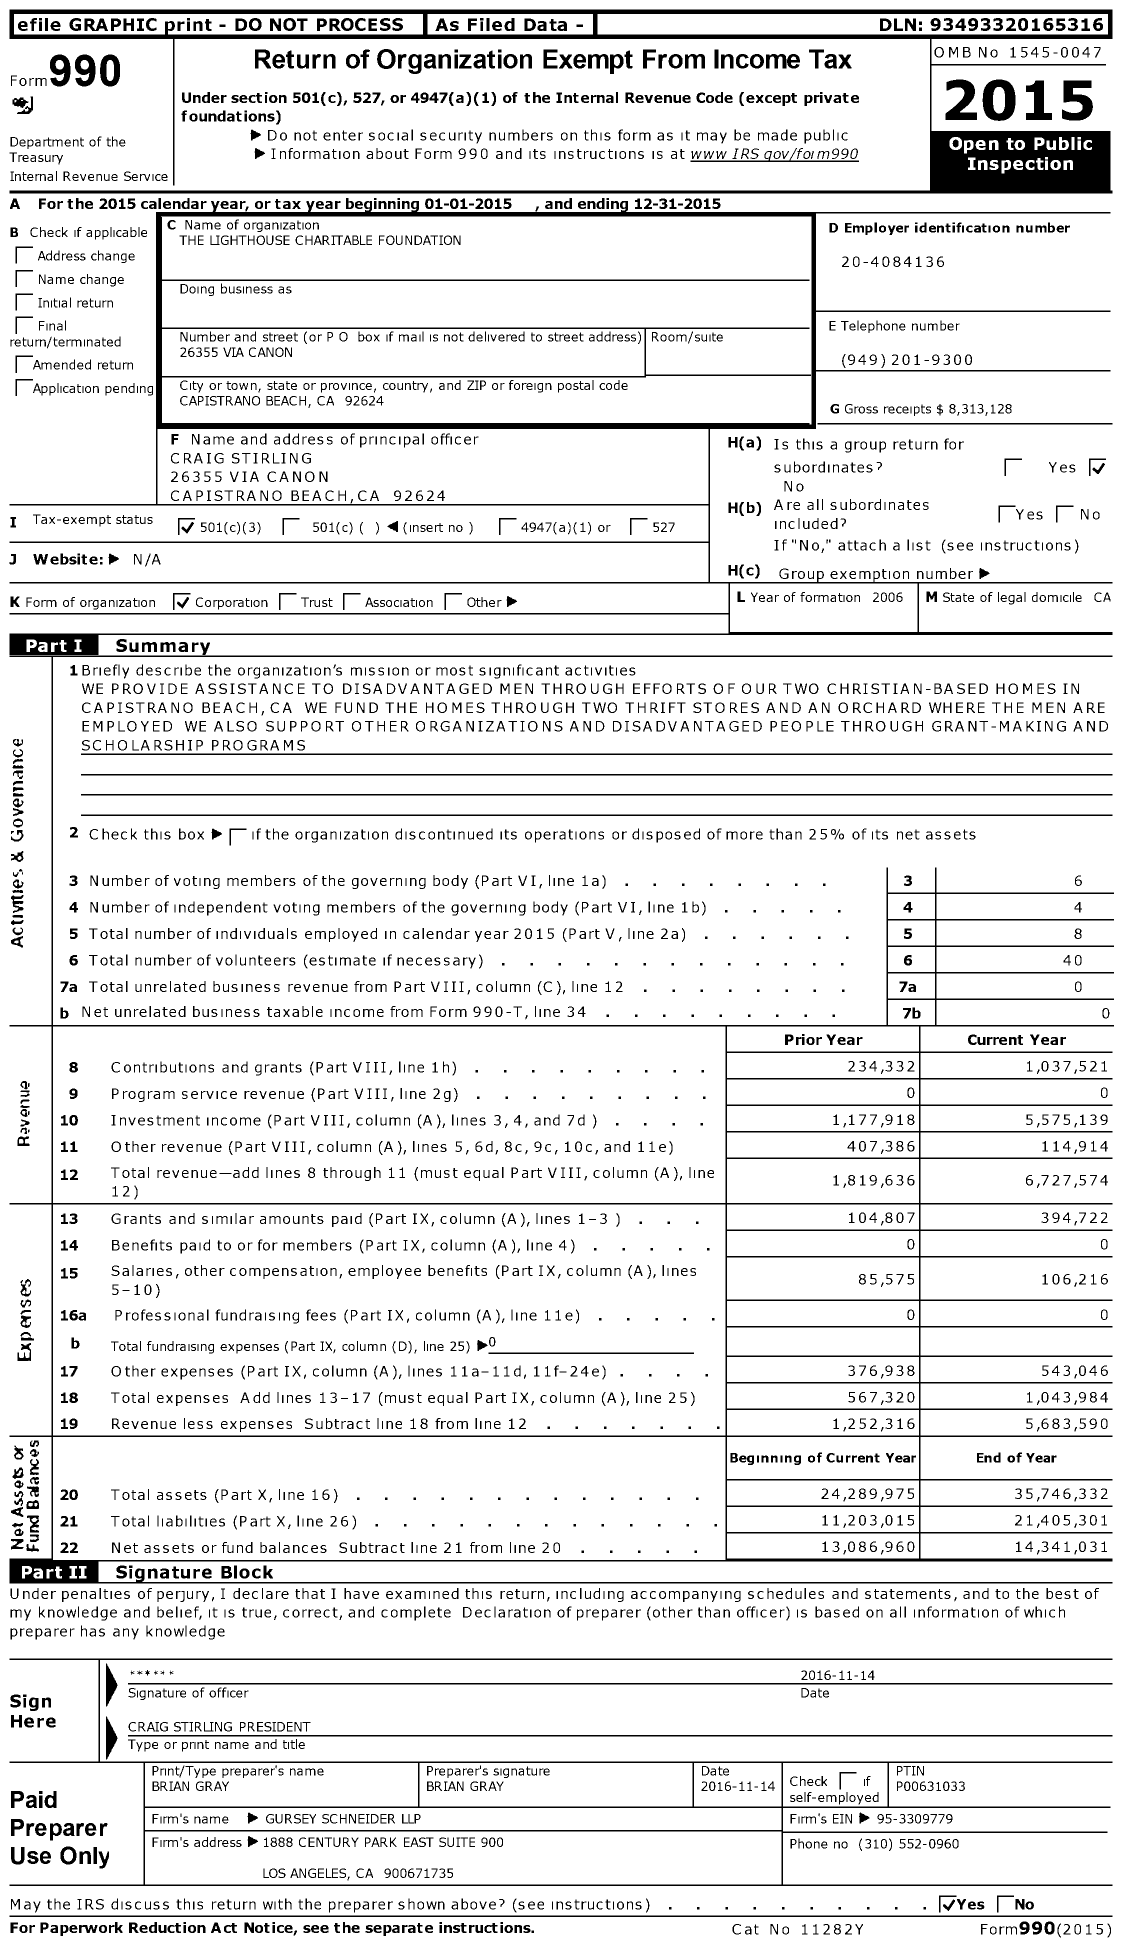 Image of first page of 2015 Form 990 for The Lighthouse Charitable Foundation